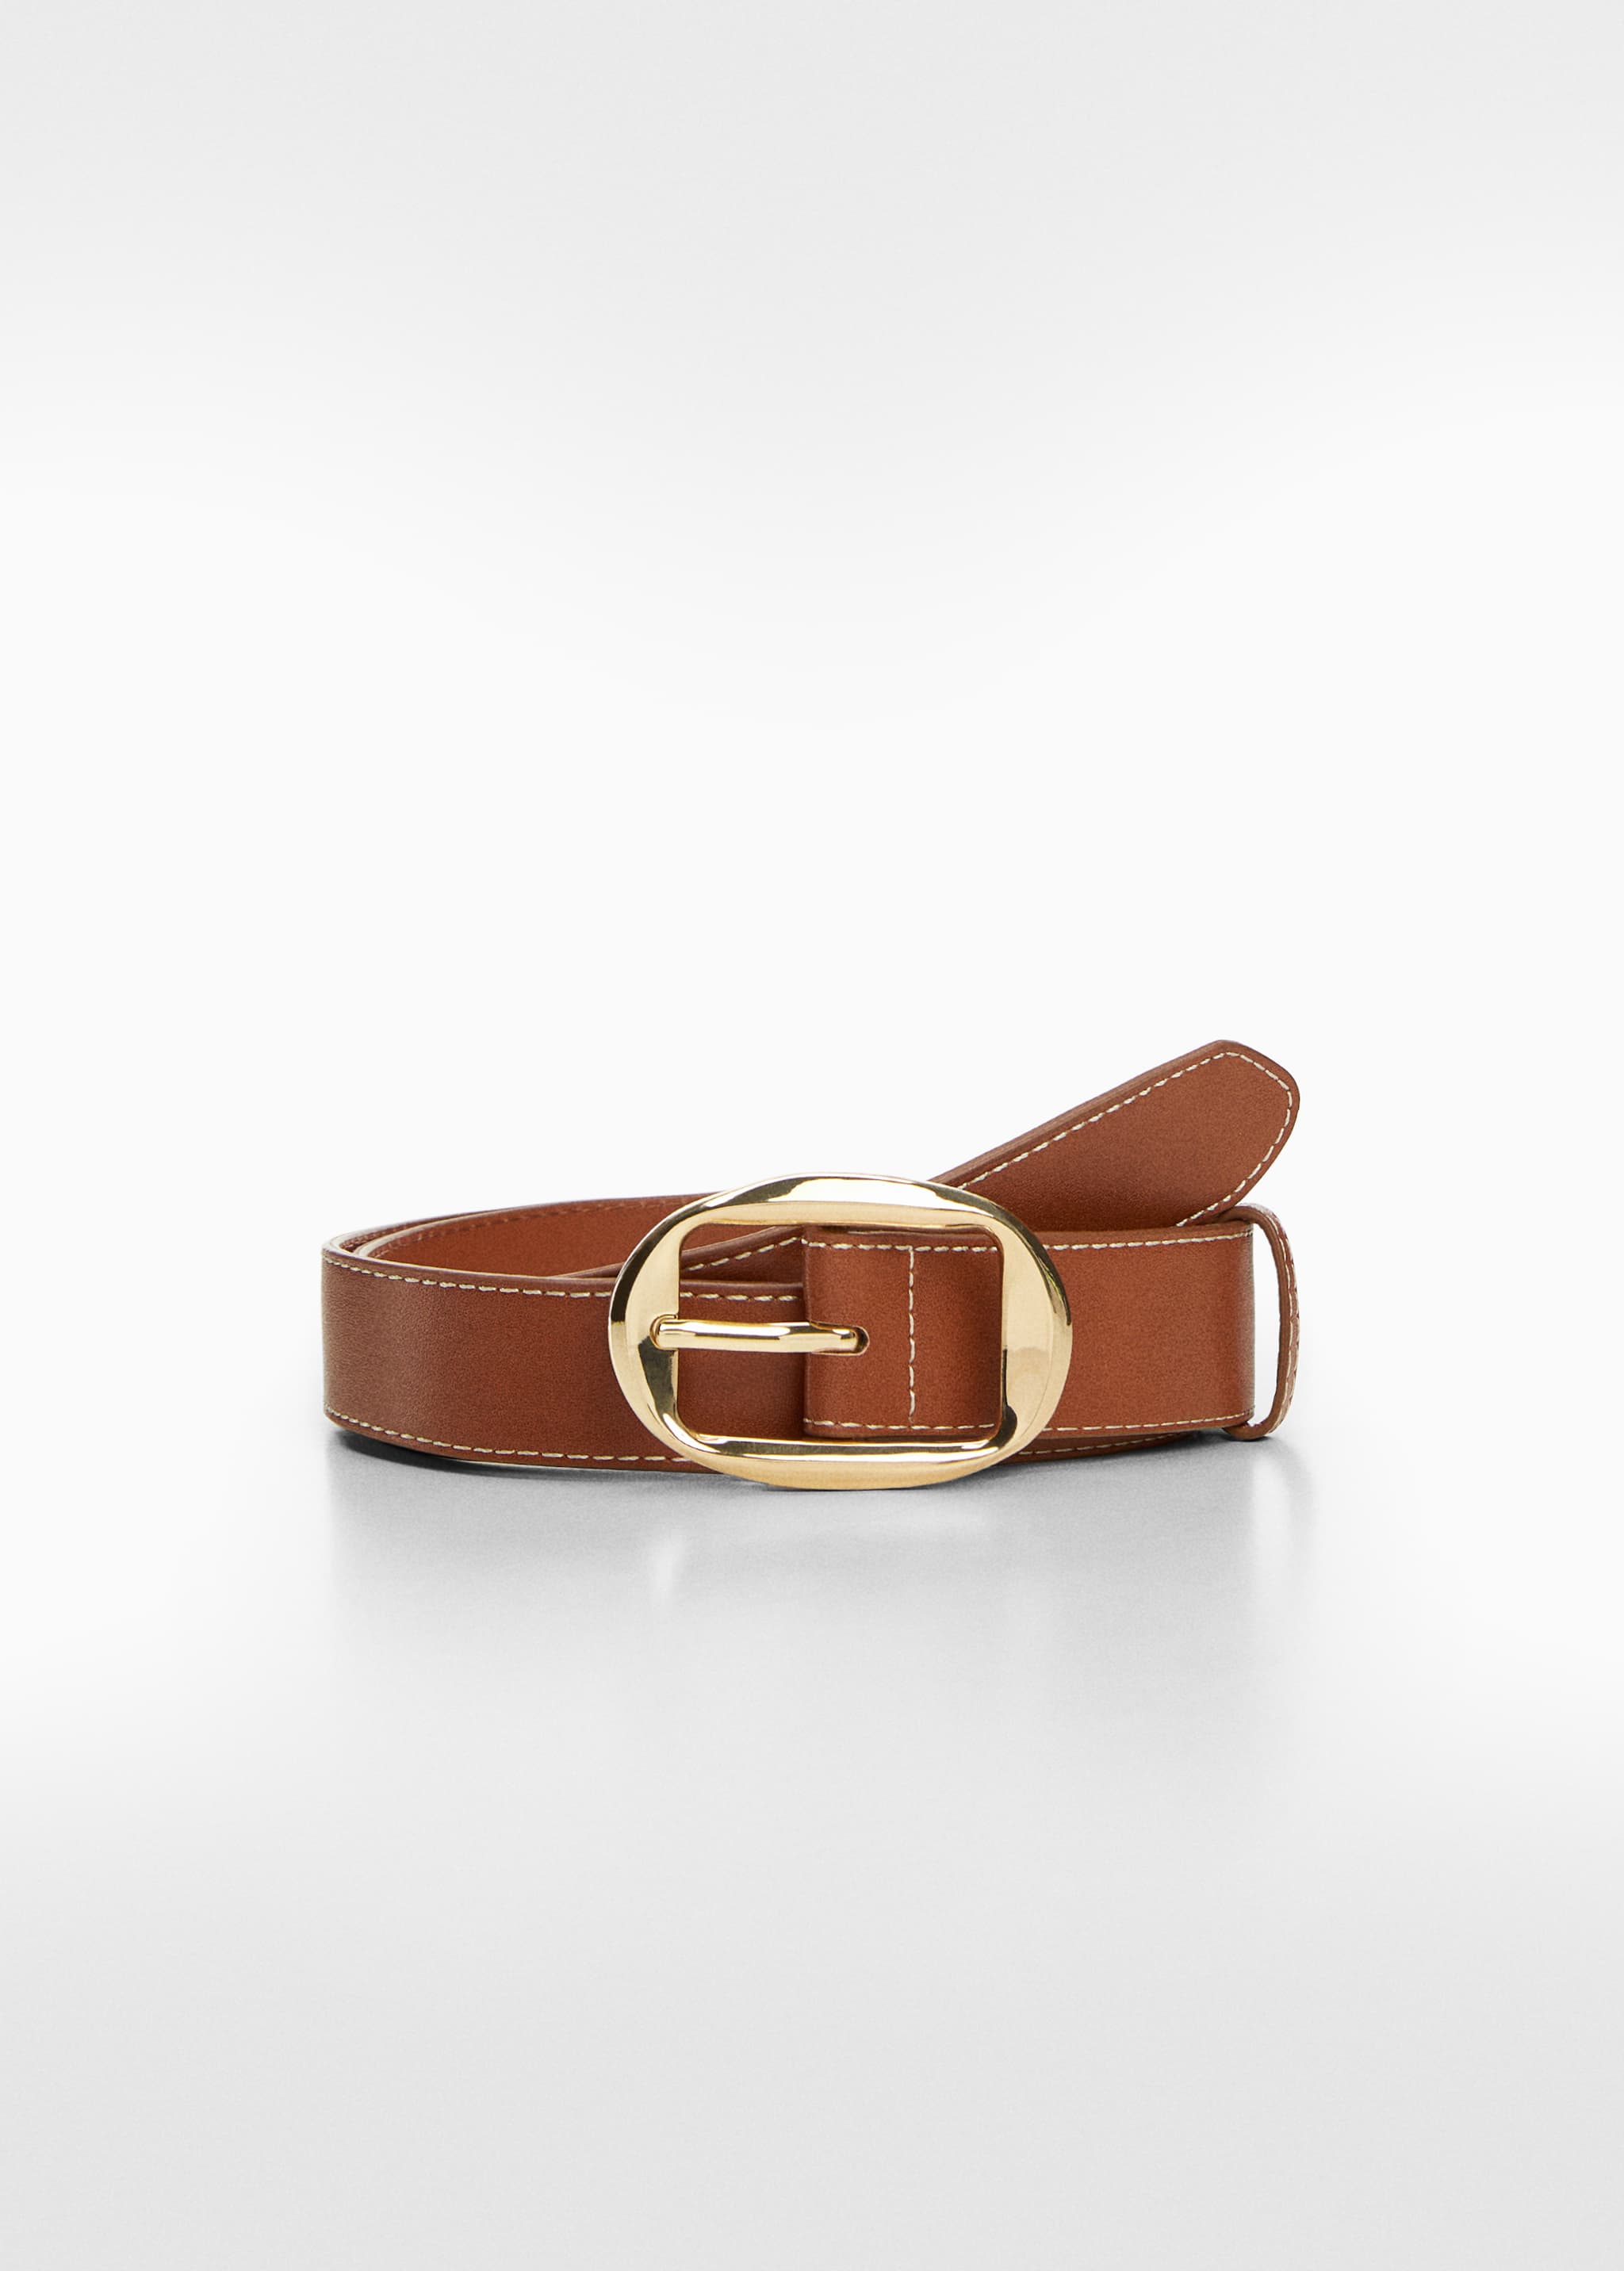 Oval buckle belt - Article without model